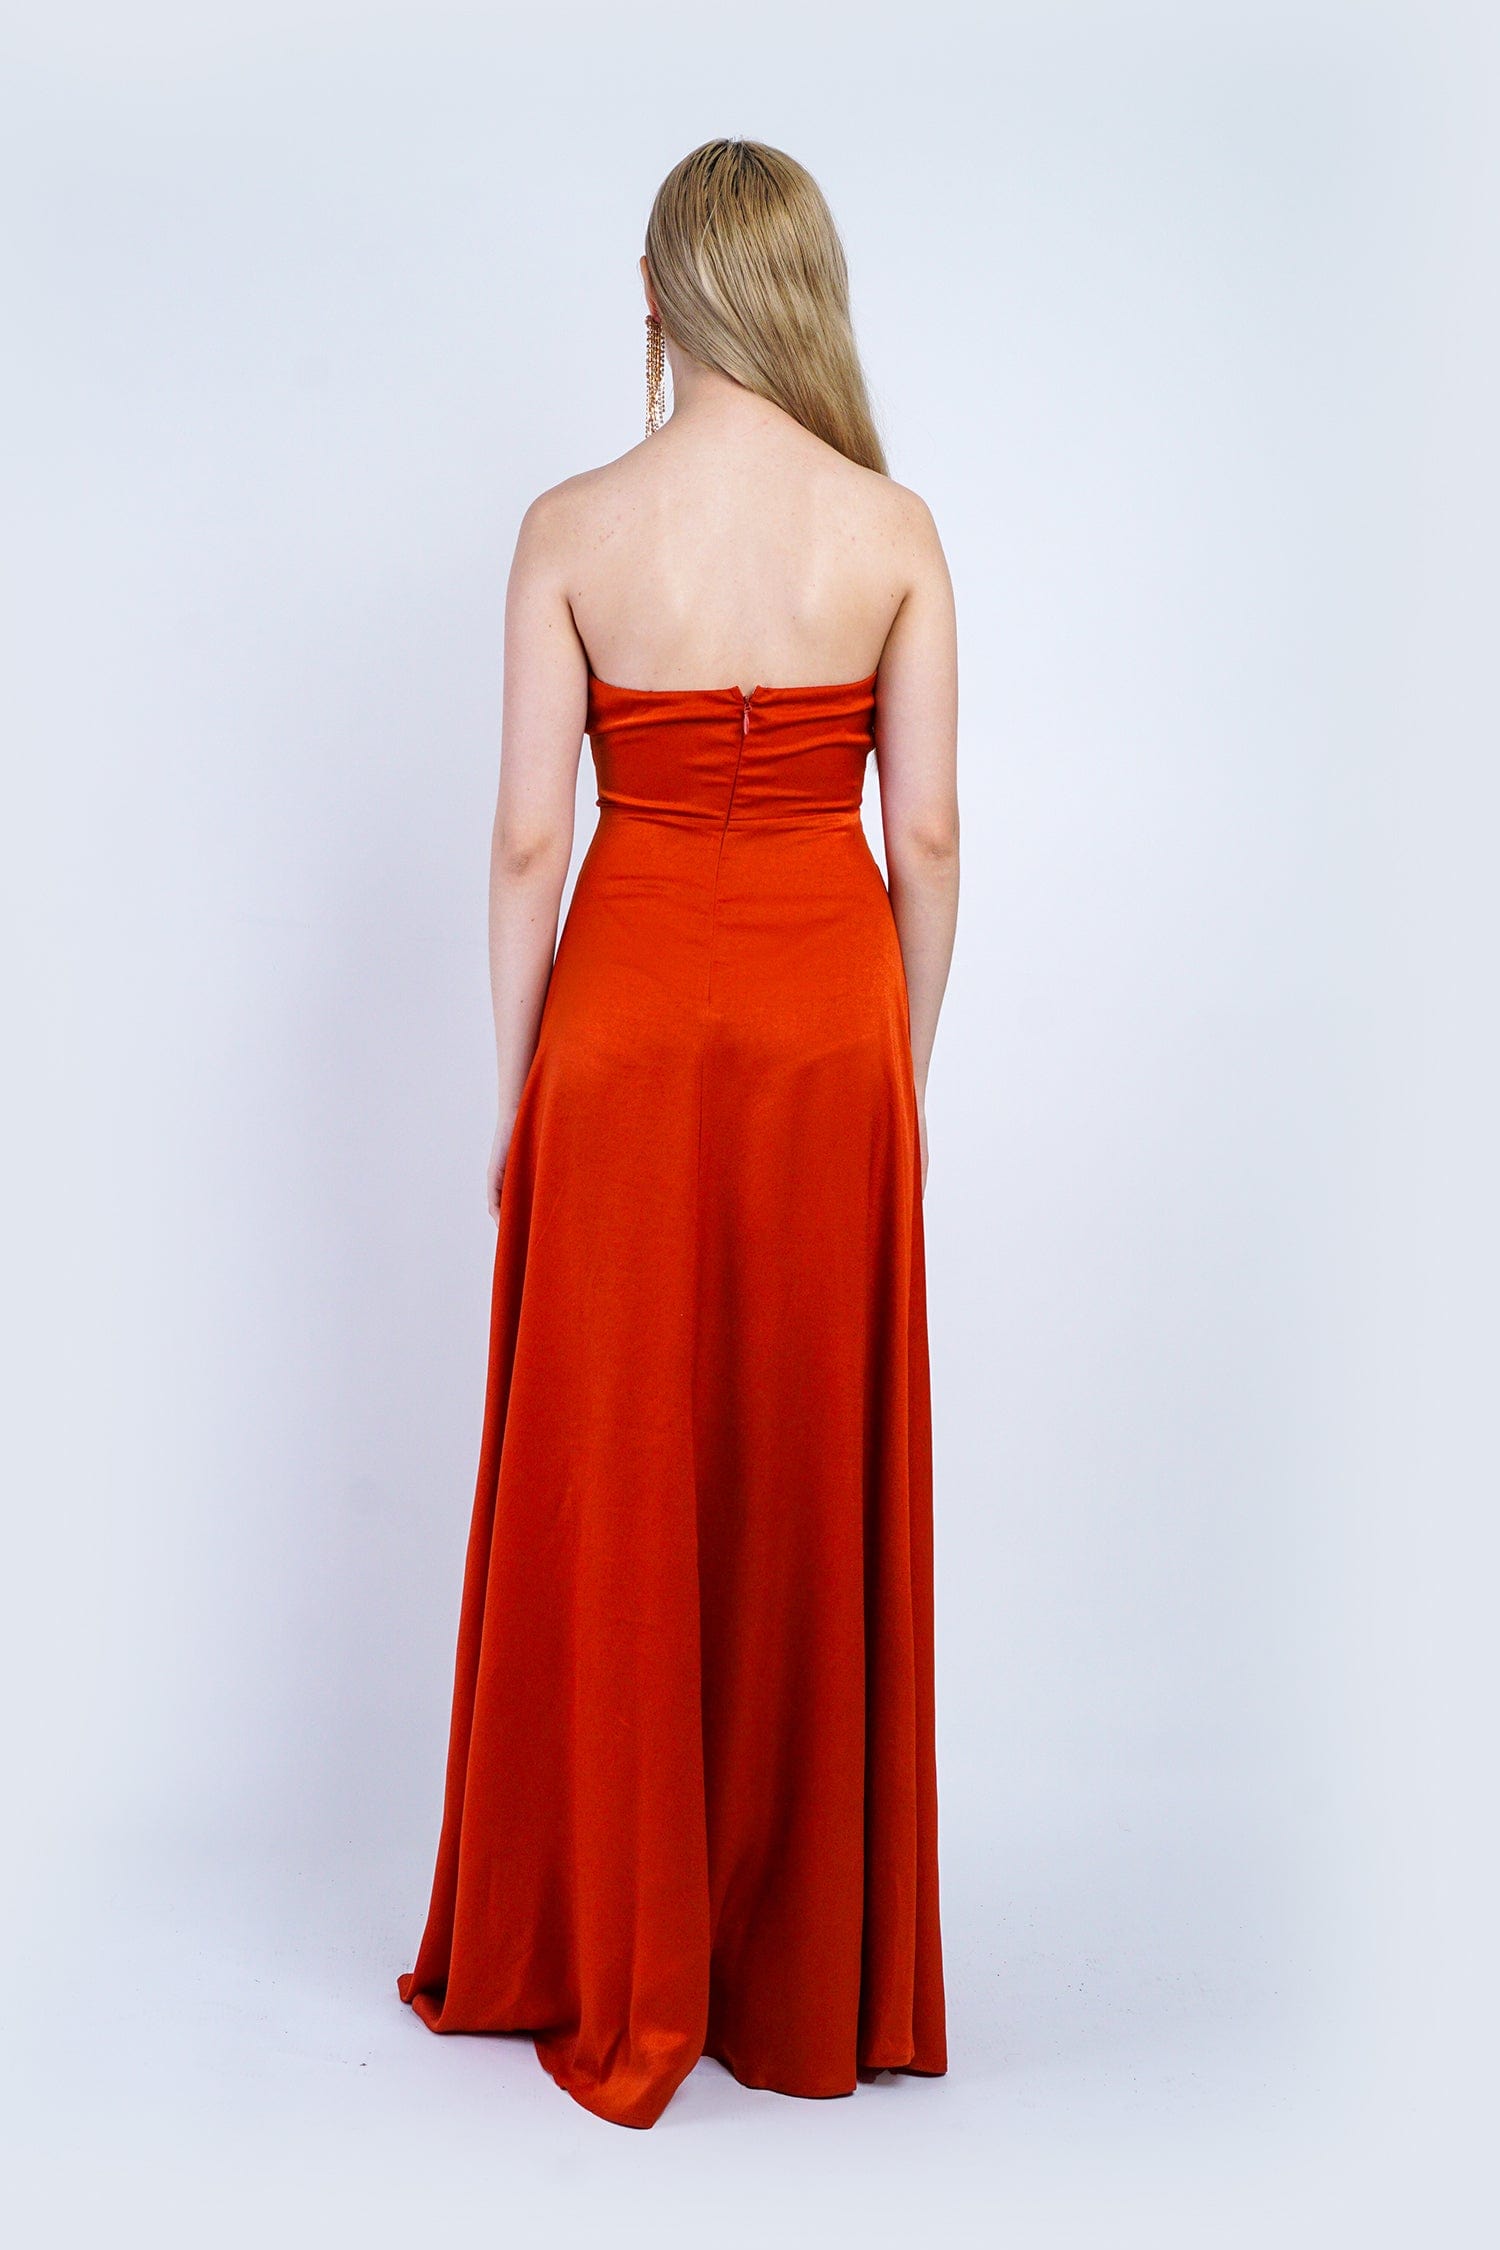 DCD GOWNS Copper V-Neck Pleated Drape Strapless Gown